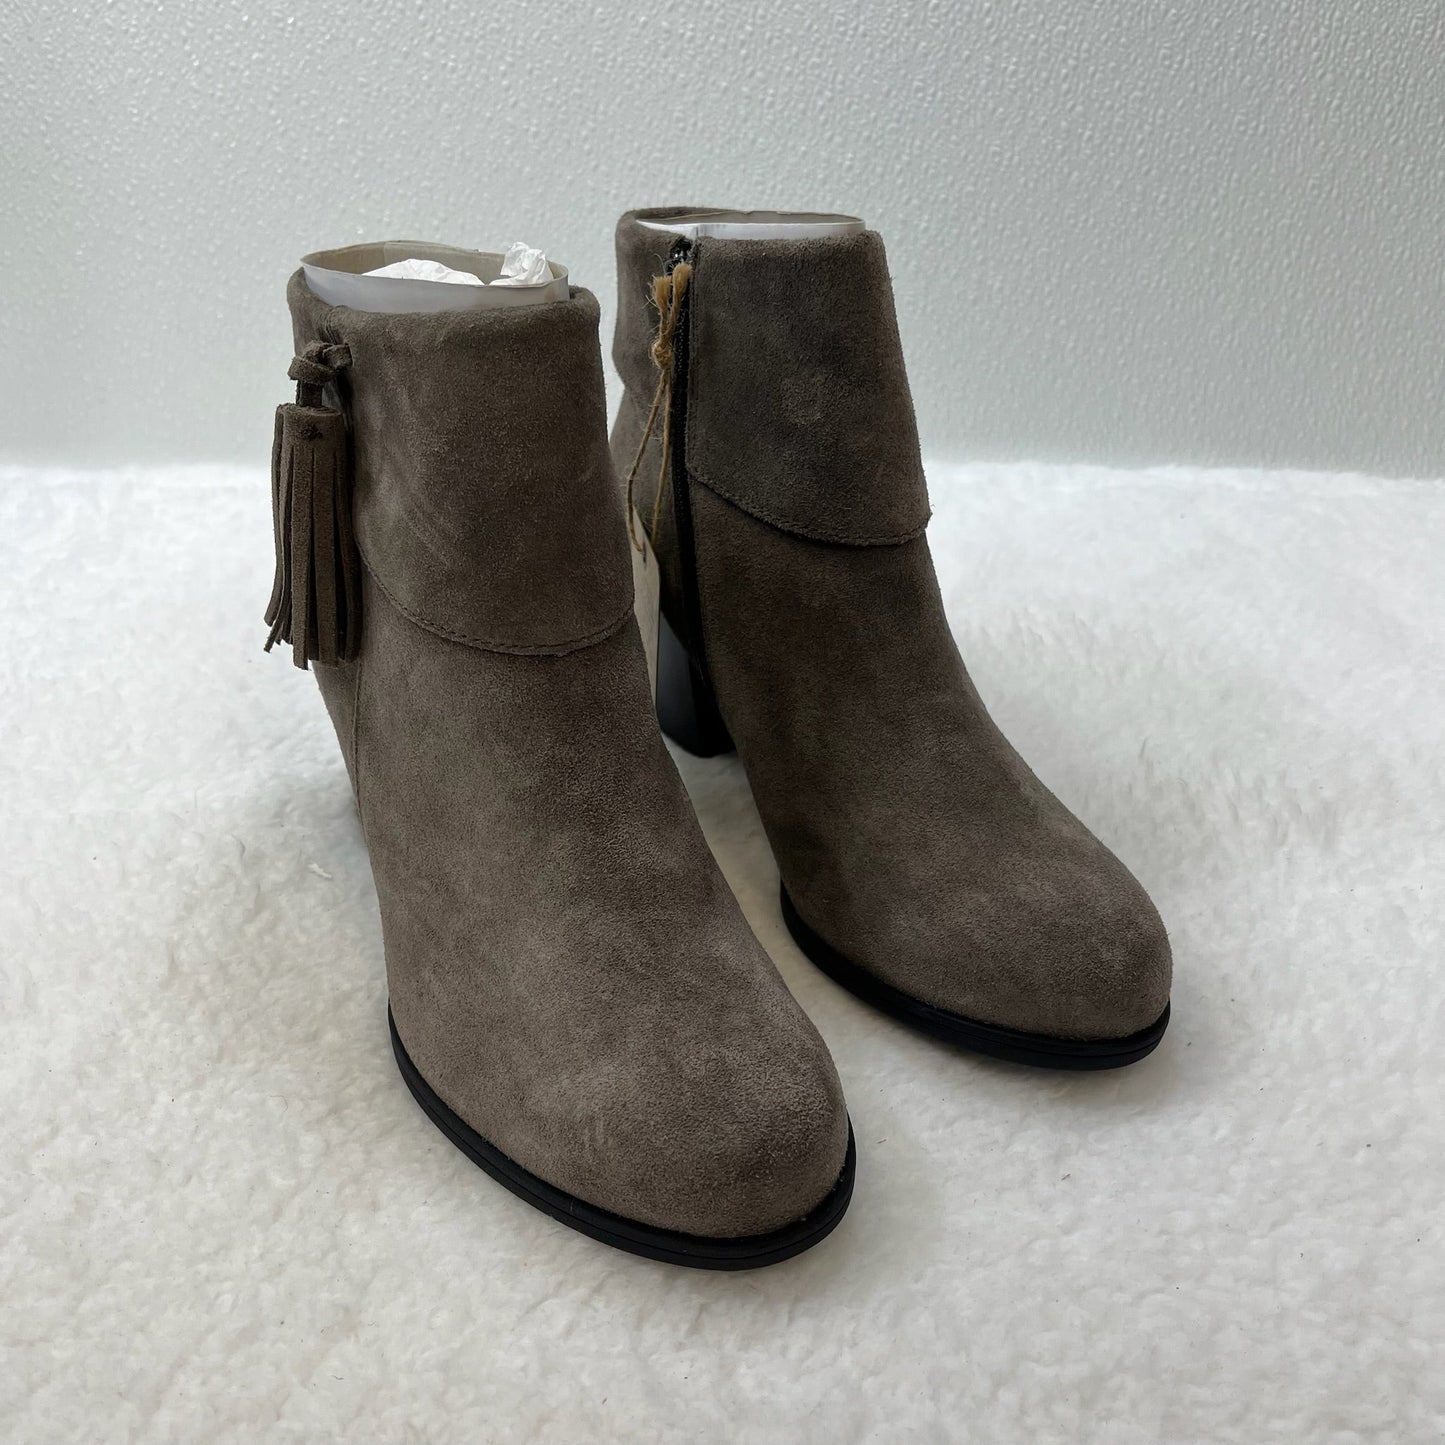 Grey Boots Ankle Flats Born, Size 8